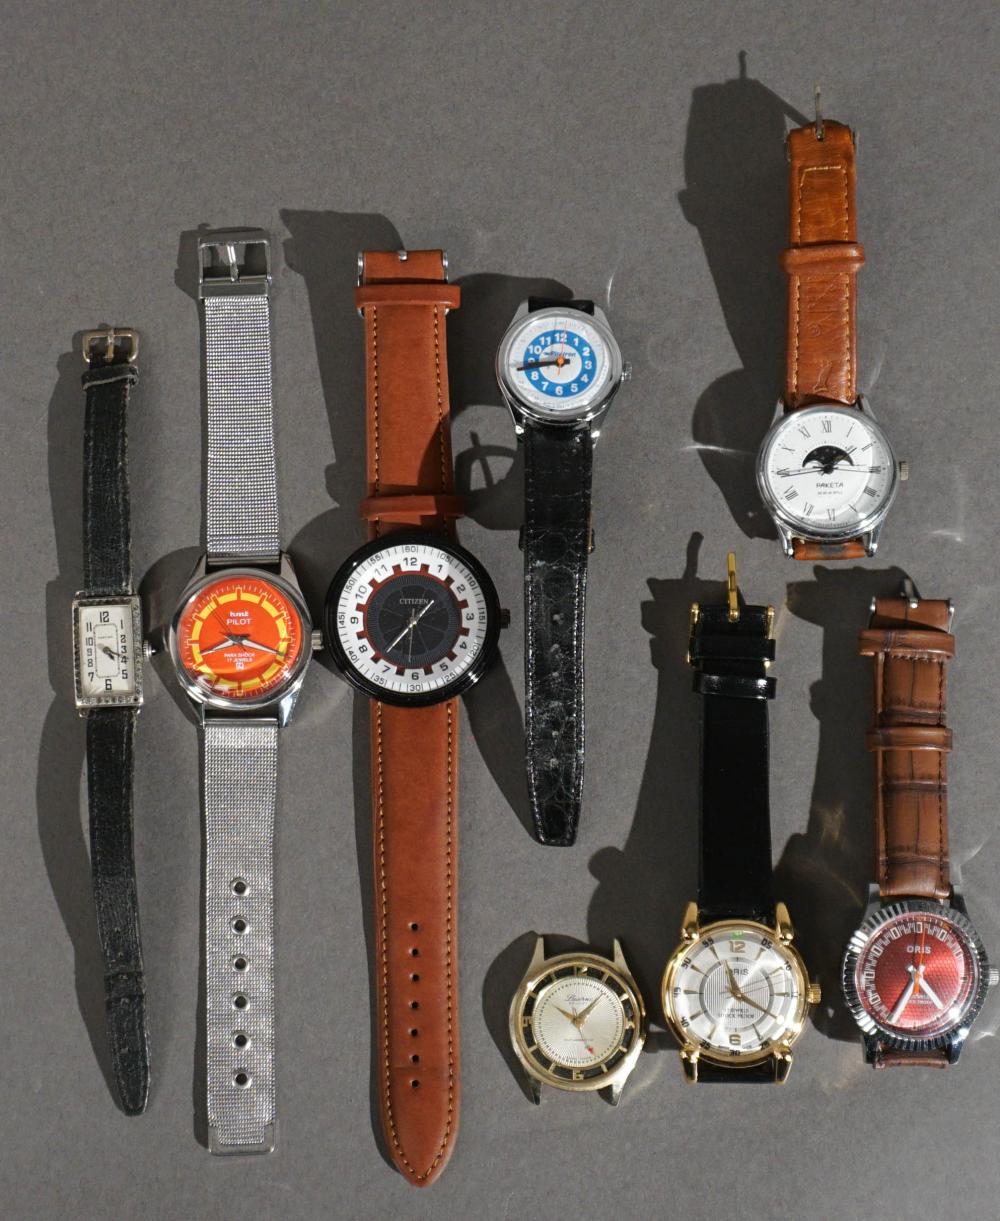 GROUP OF ASSORTED WRISTWATCHESGroup 2e847c